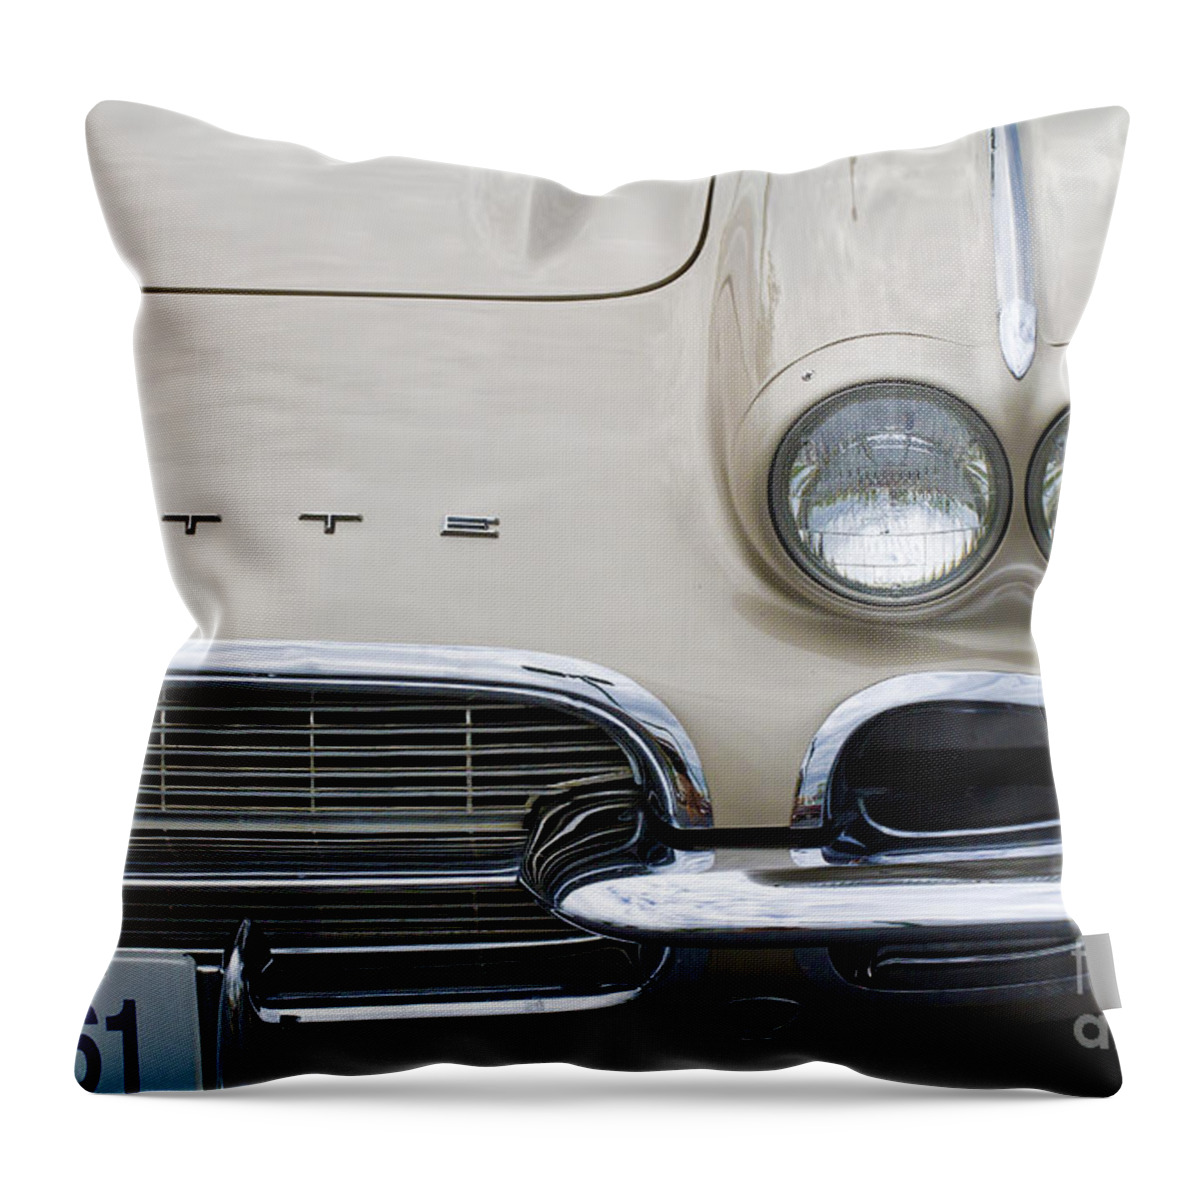 1961 Chevrolet Corvette Throw Pillow featuring the photograph 1961 Corvette by Dennis Hedberg